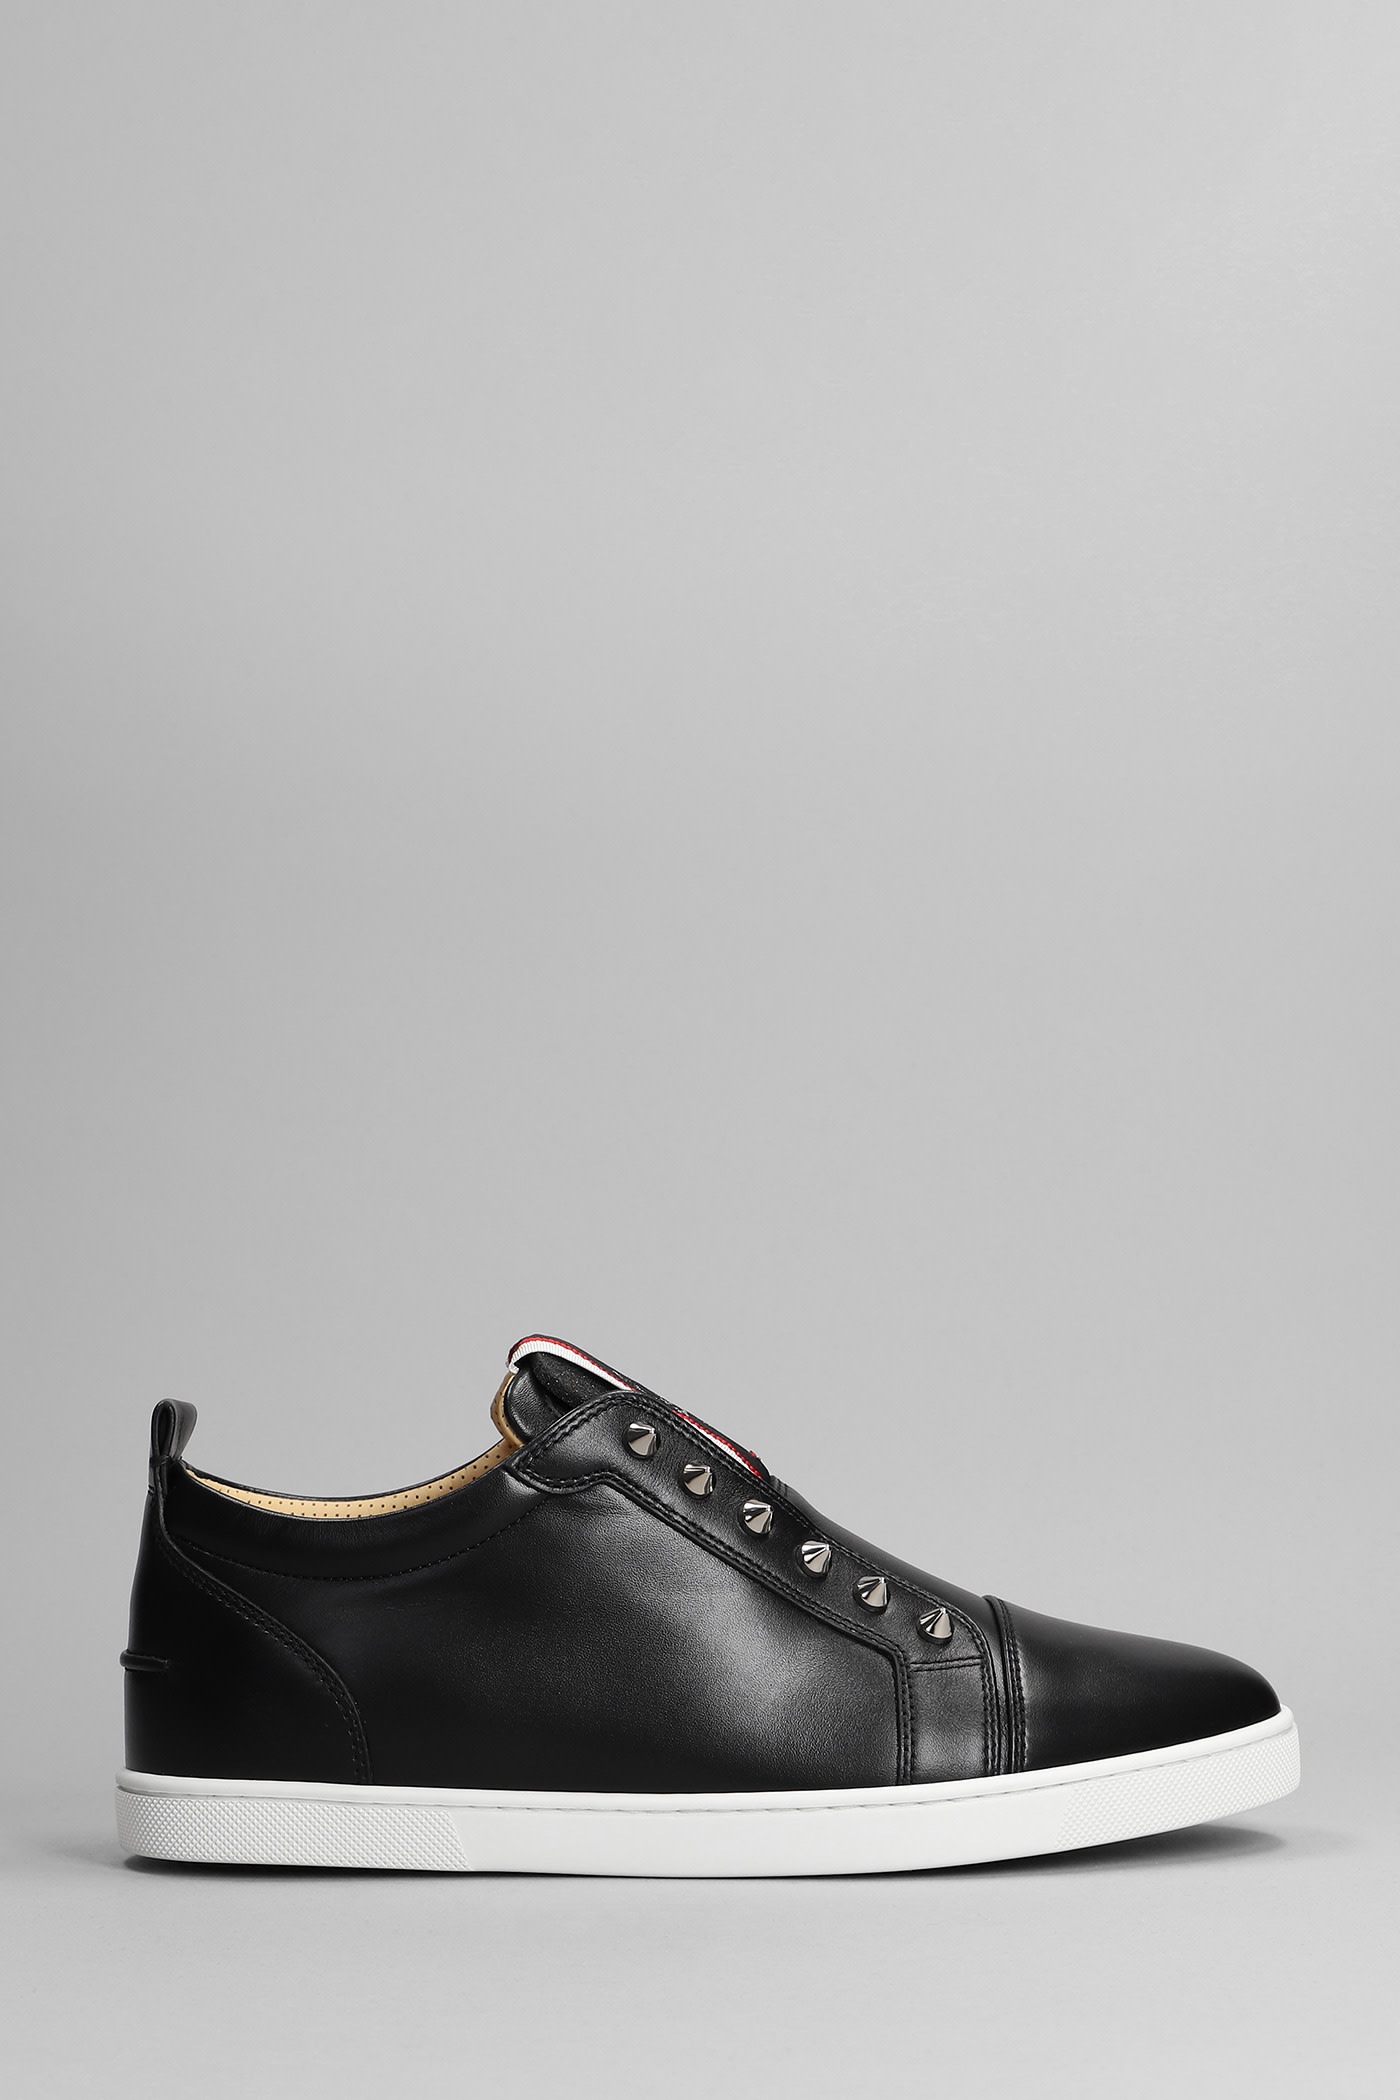 Christian Louboutin F.a.v. Fique Sneakers In Black Leather